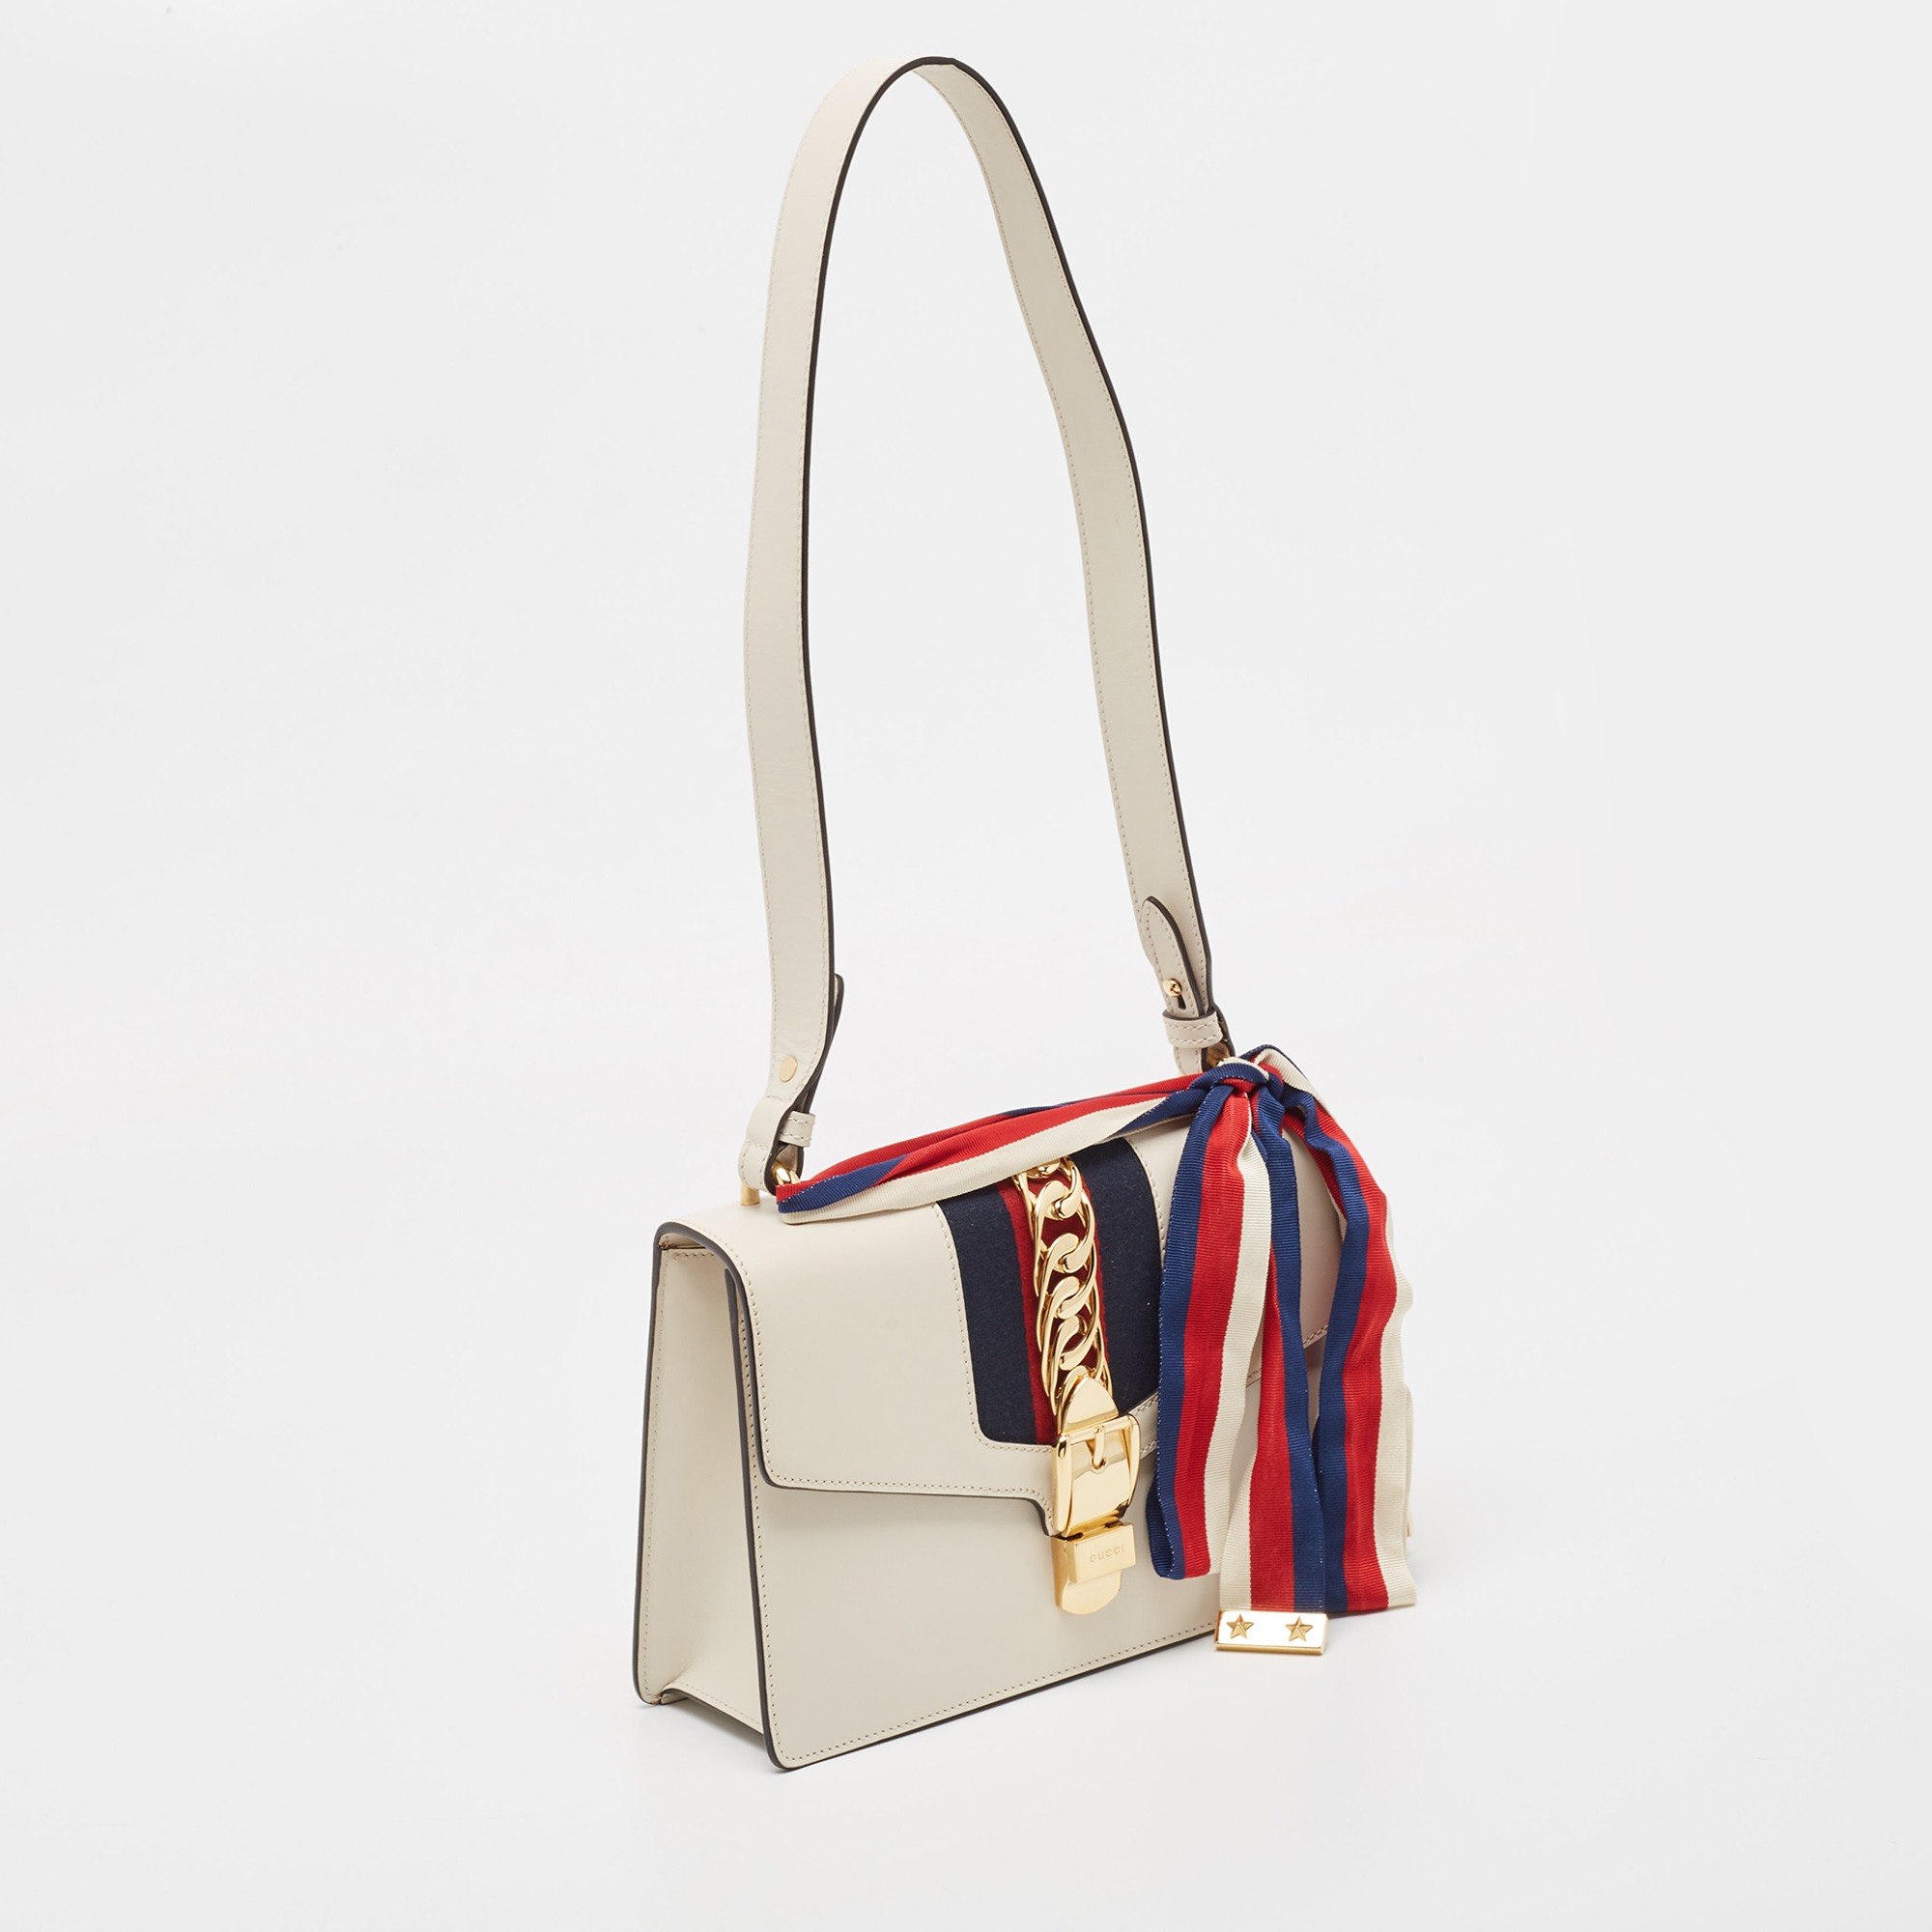 Gucci Off White Leather Small Web Sylvie Shoulder Bag